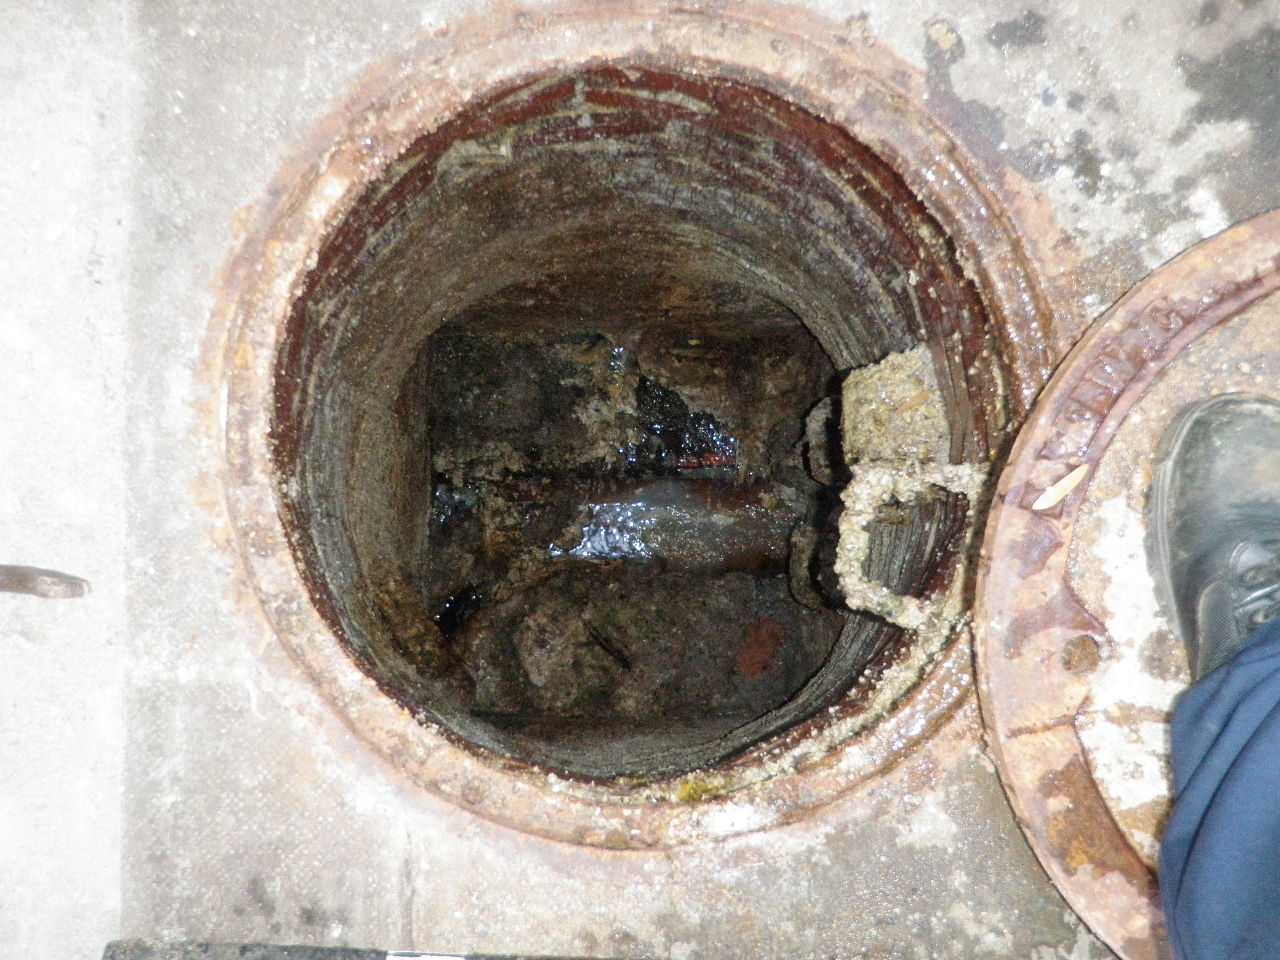 At 2600 Pennsylvania Avenue NW, so called flushable wipes have caused a clog. (Courtesy DC Water)